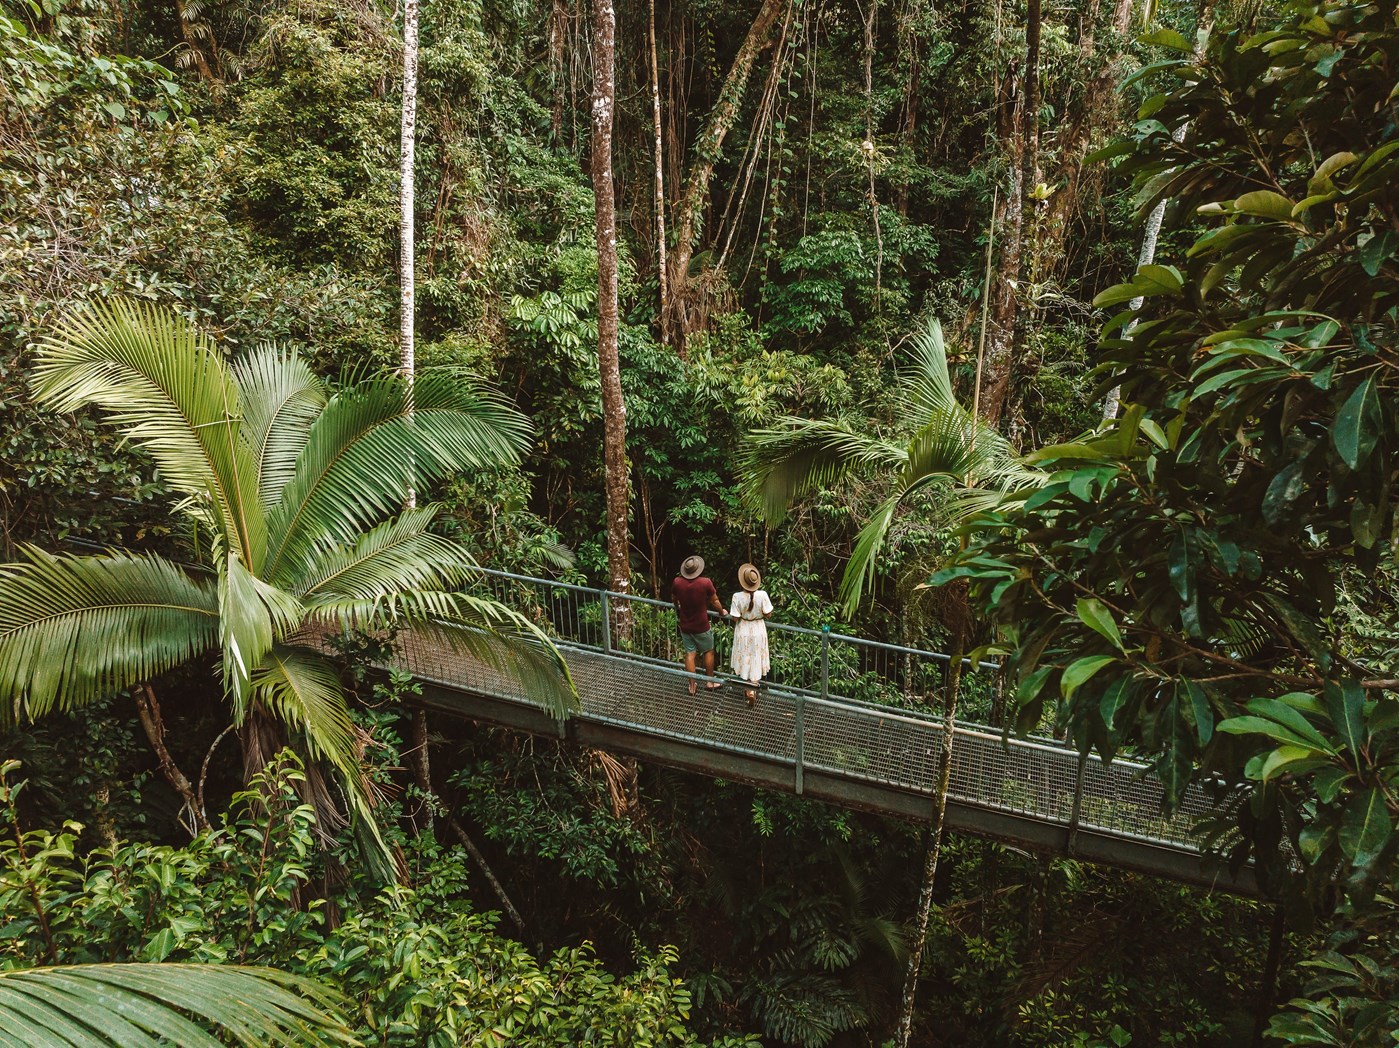 Daintree Discovery Centre (Photo credit: Tourism & Events Queensland)